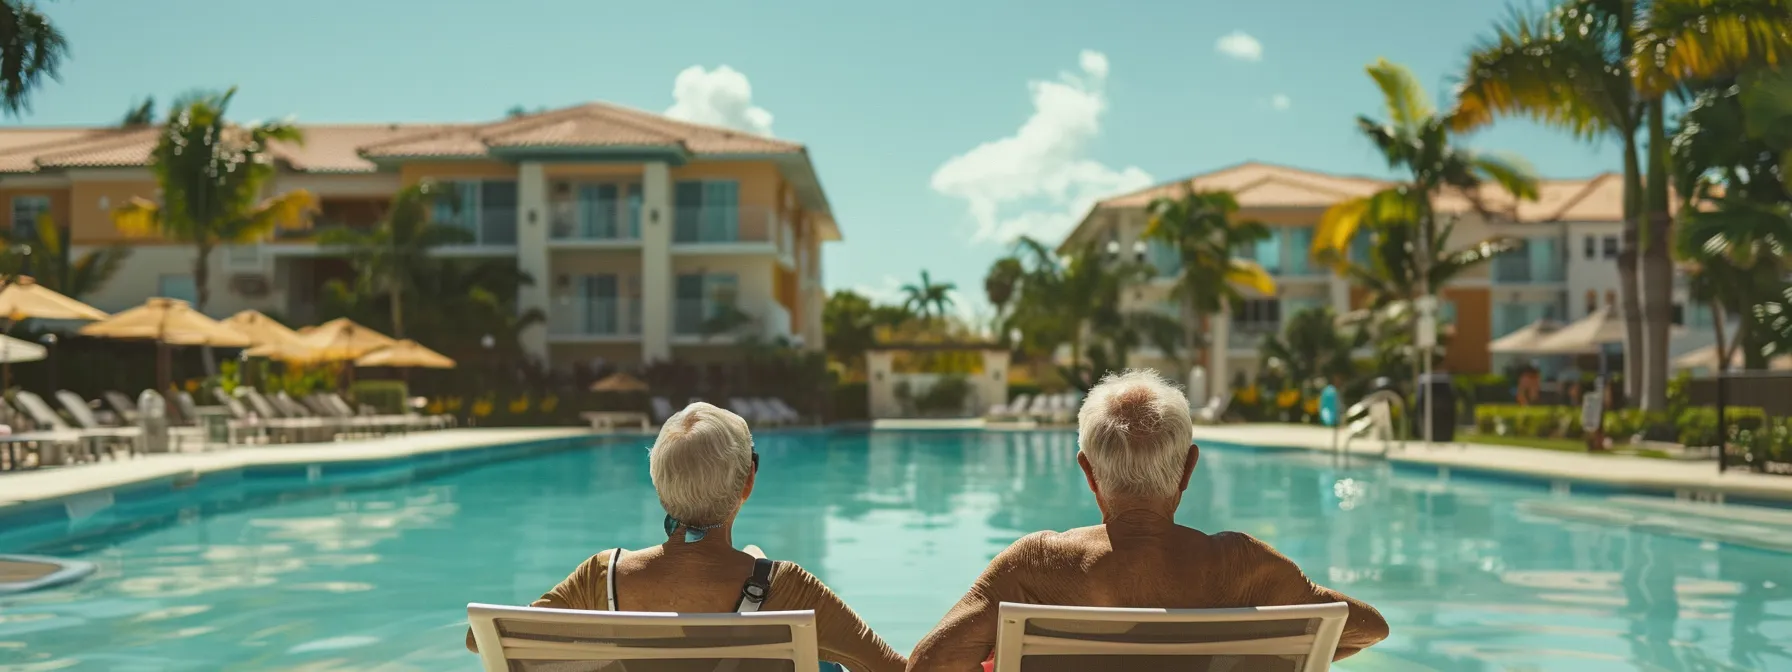 elderly couple relaxing by the pool in a luxury miami retirement community.